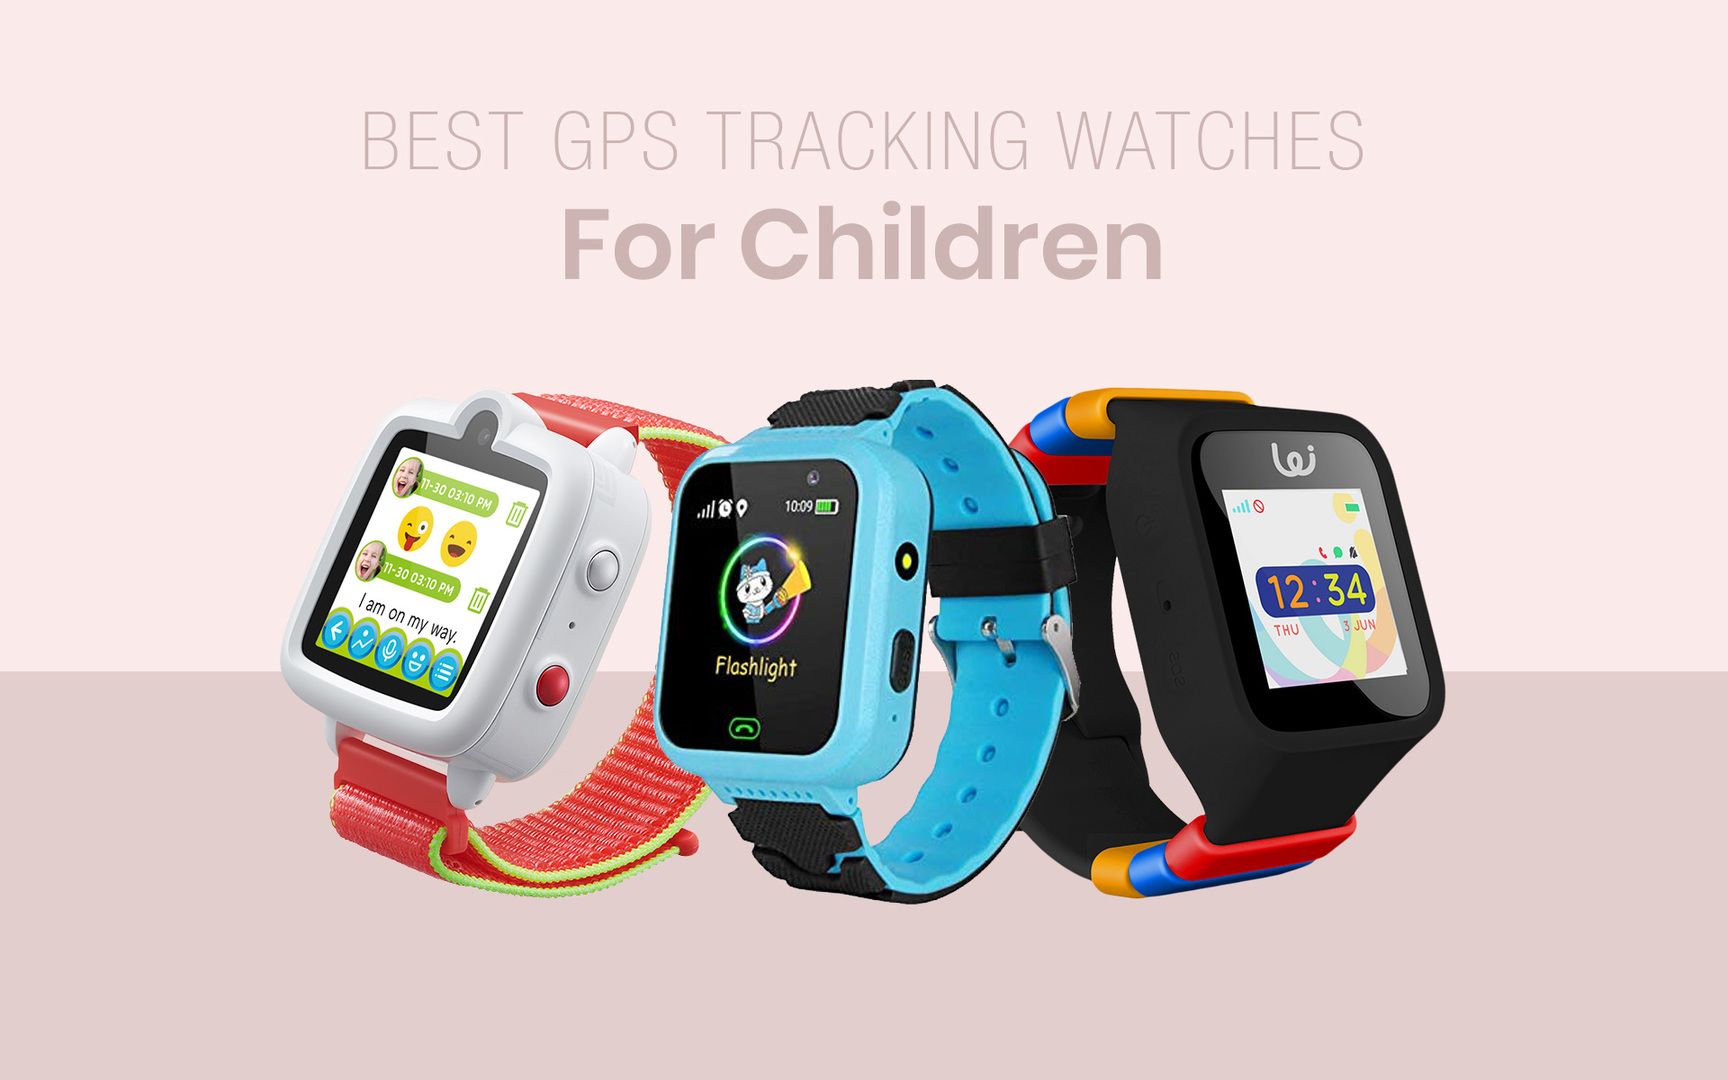 Best GPS Tracking Watches For Children